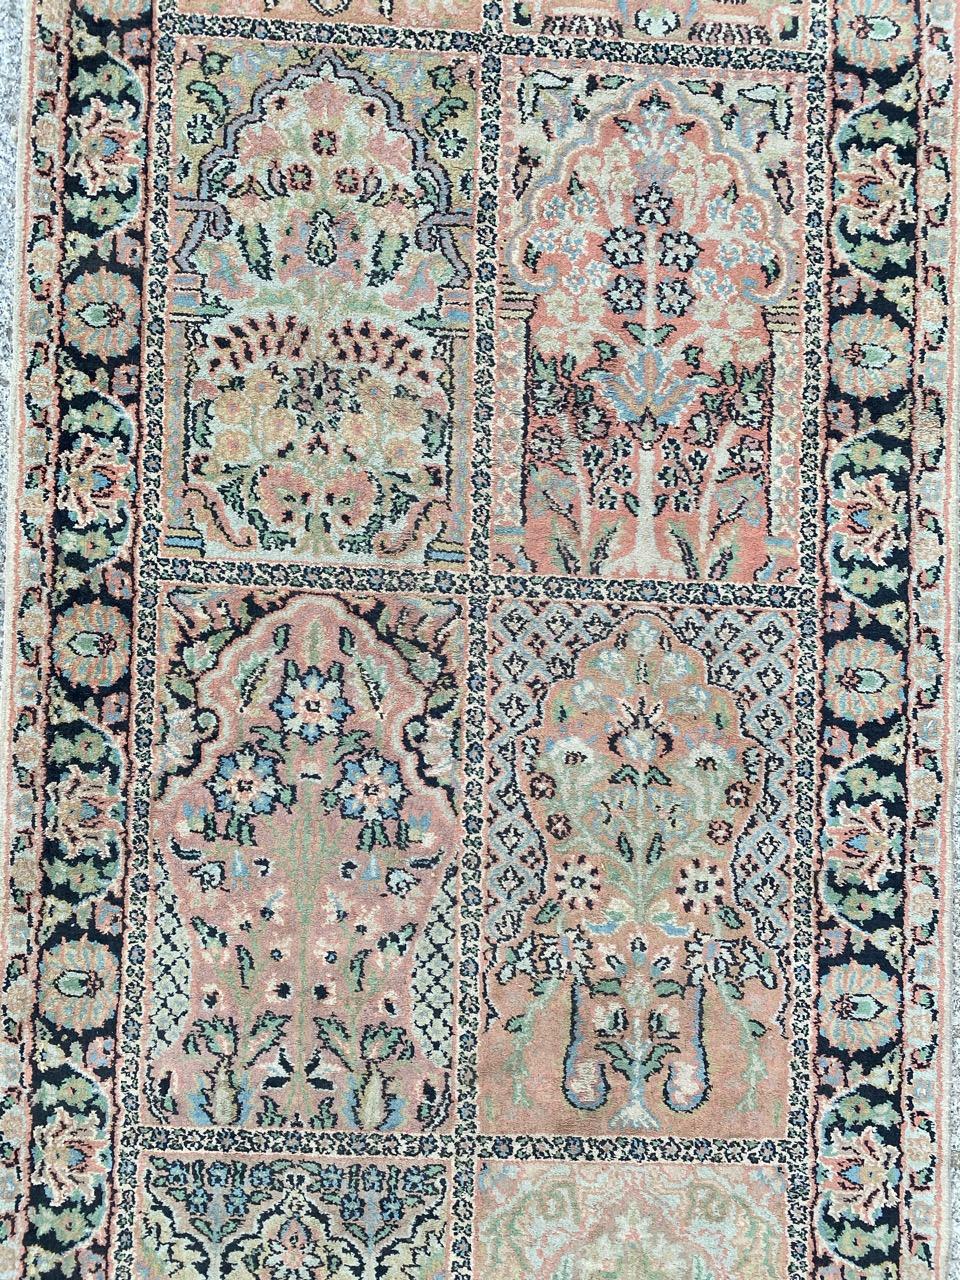 Late 20th century silk and cotton Kashmir runner with beautiful floral design and light colors, entirely hand knotted with silk and cotton velvet on cotton foundation.